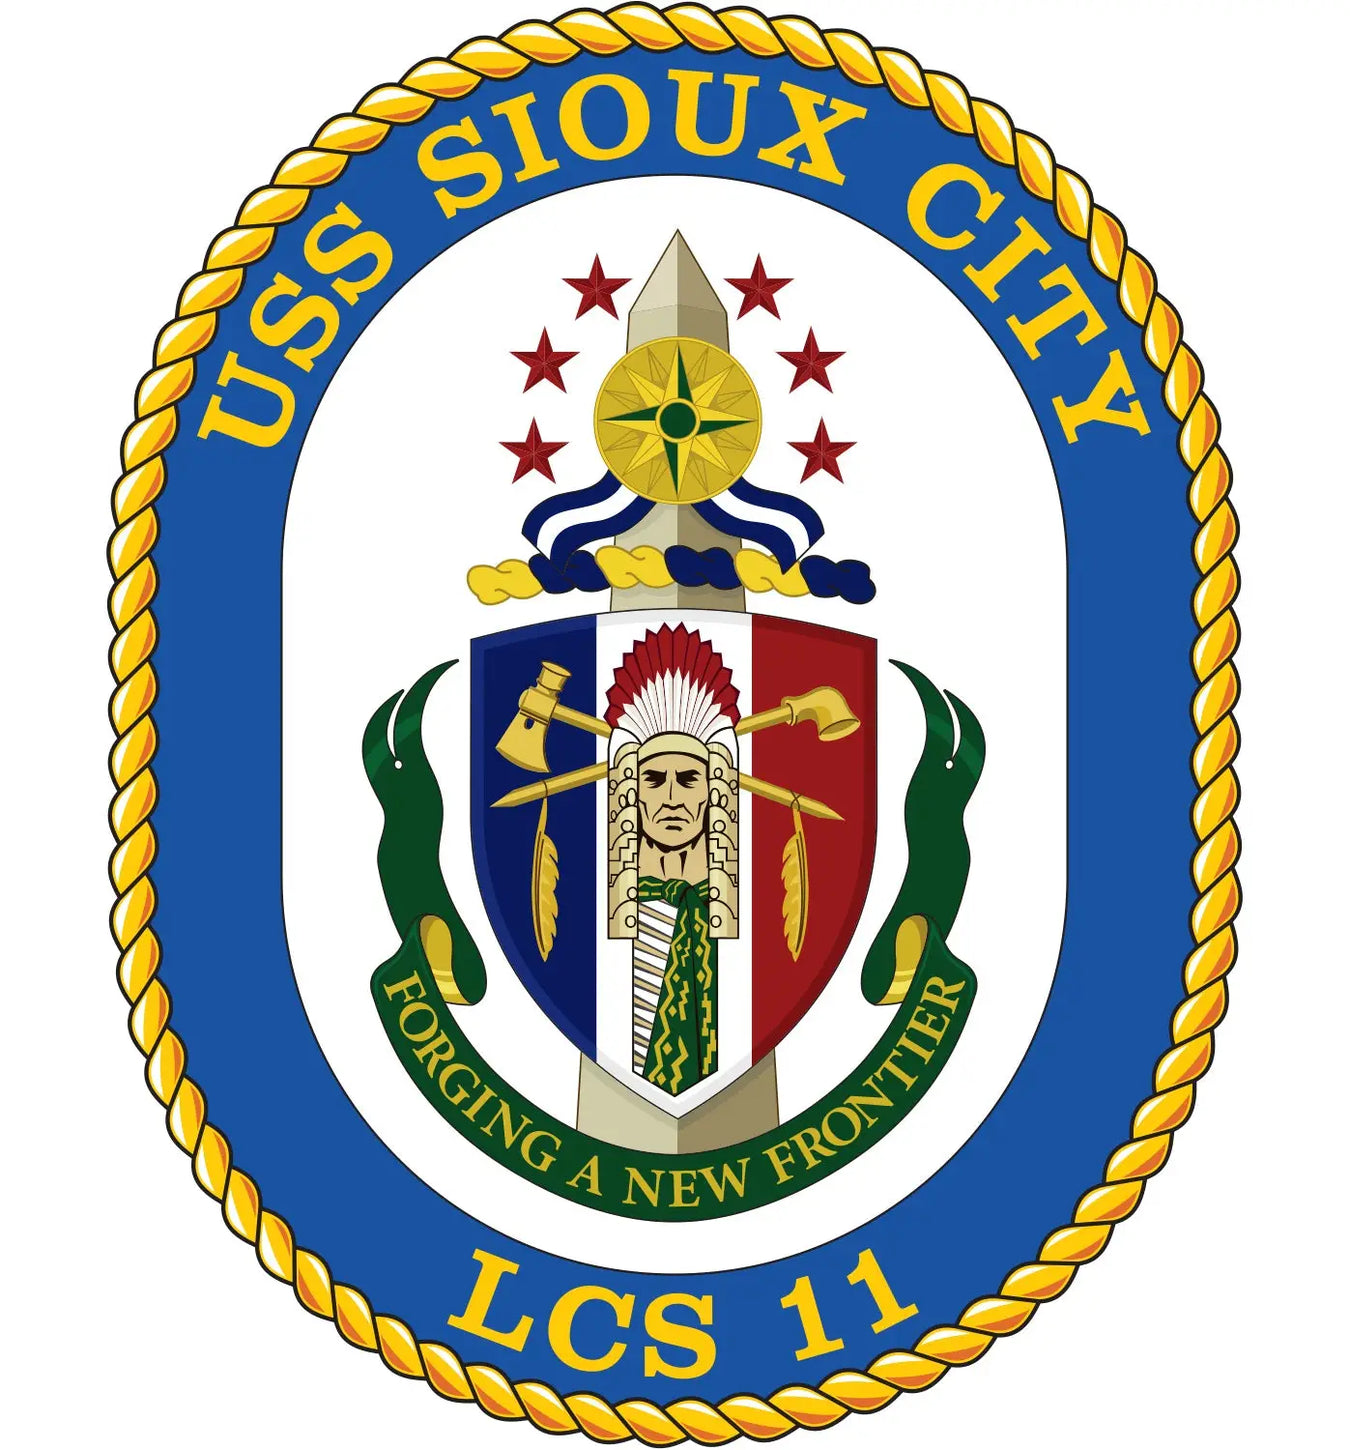 USS Sioux City (LCS-11)